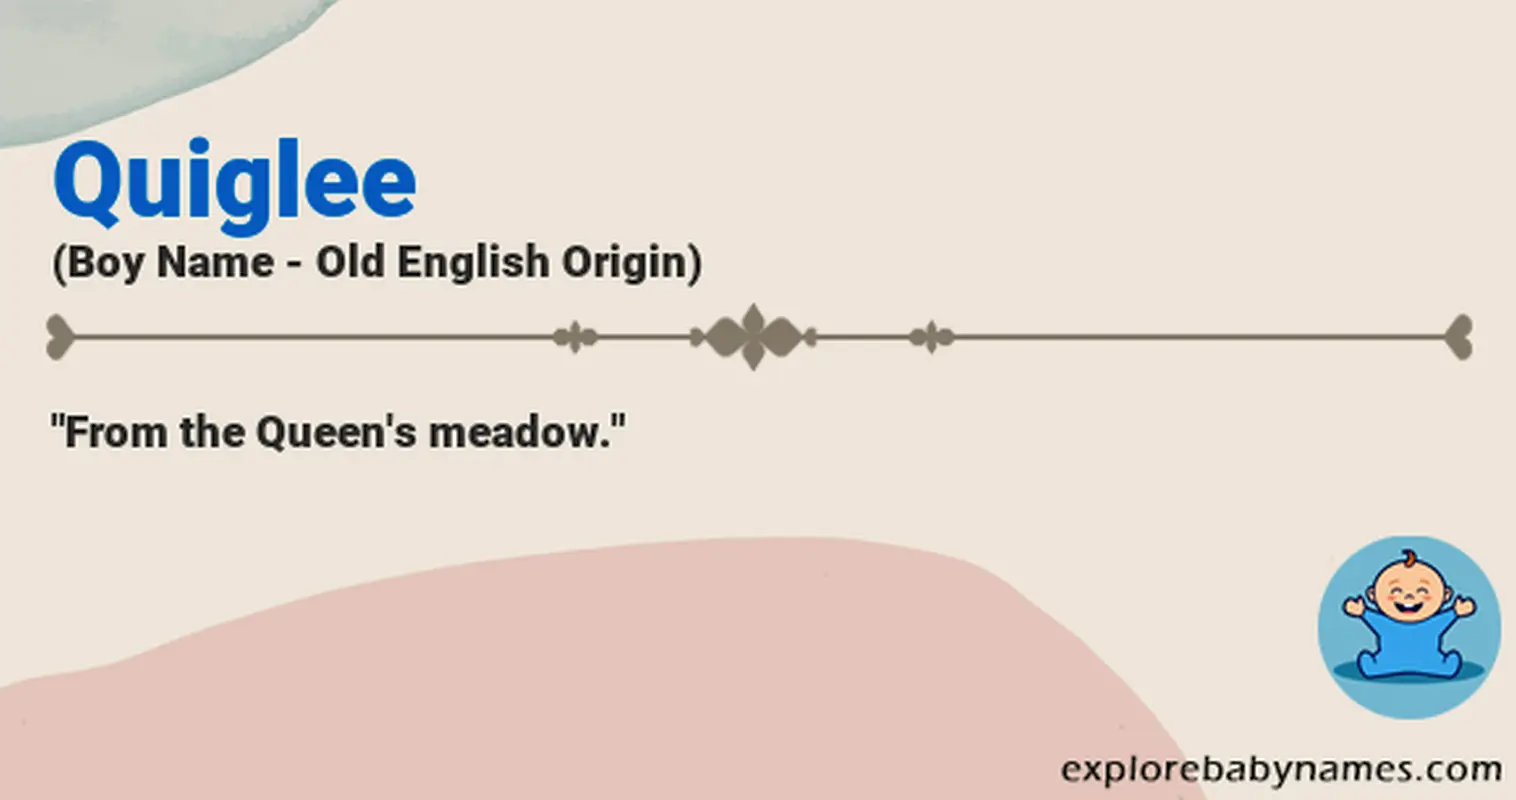 Meaning of Quiglee